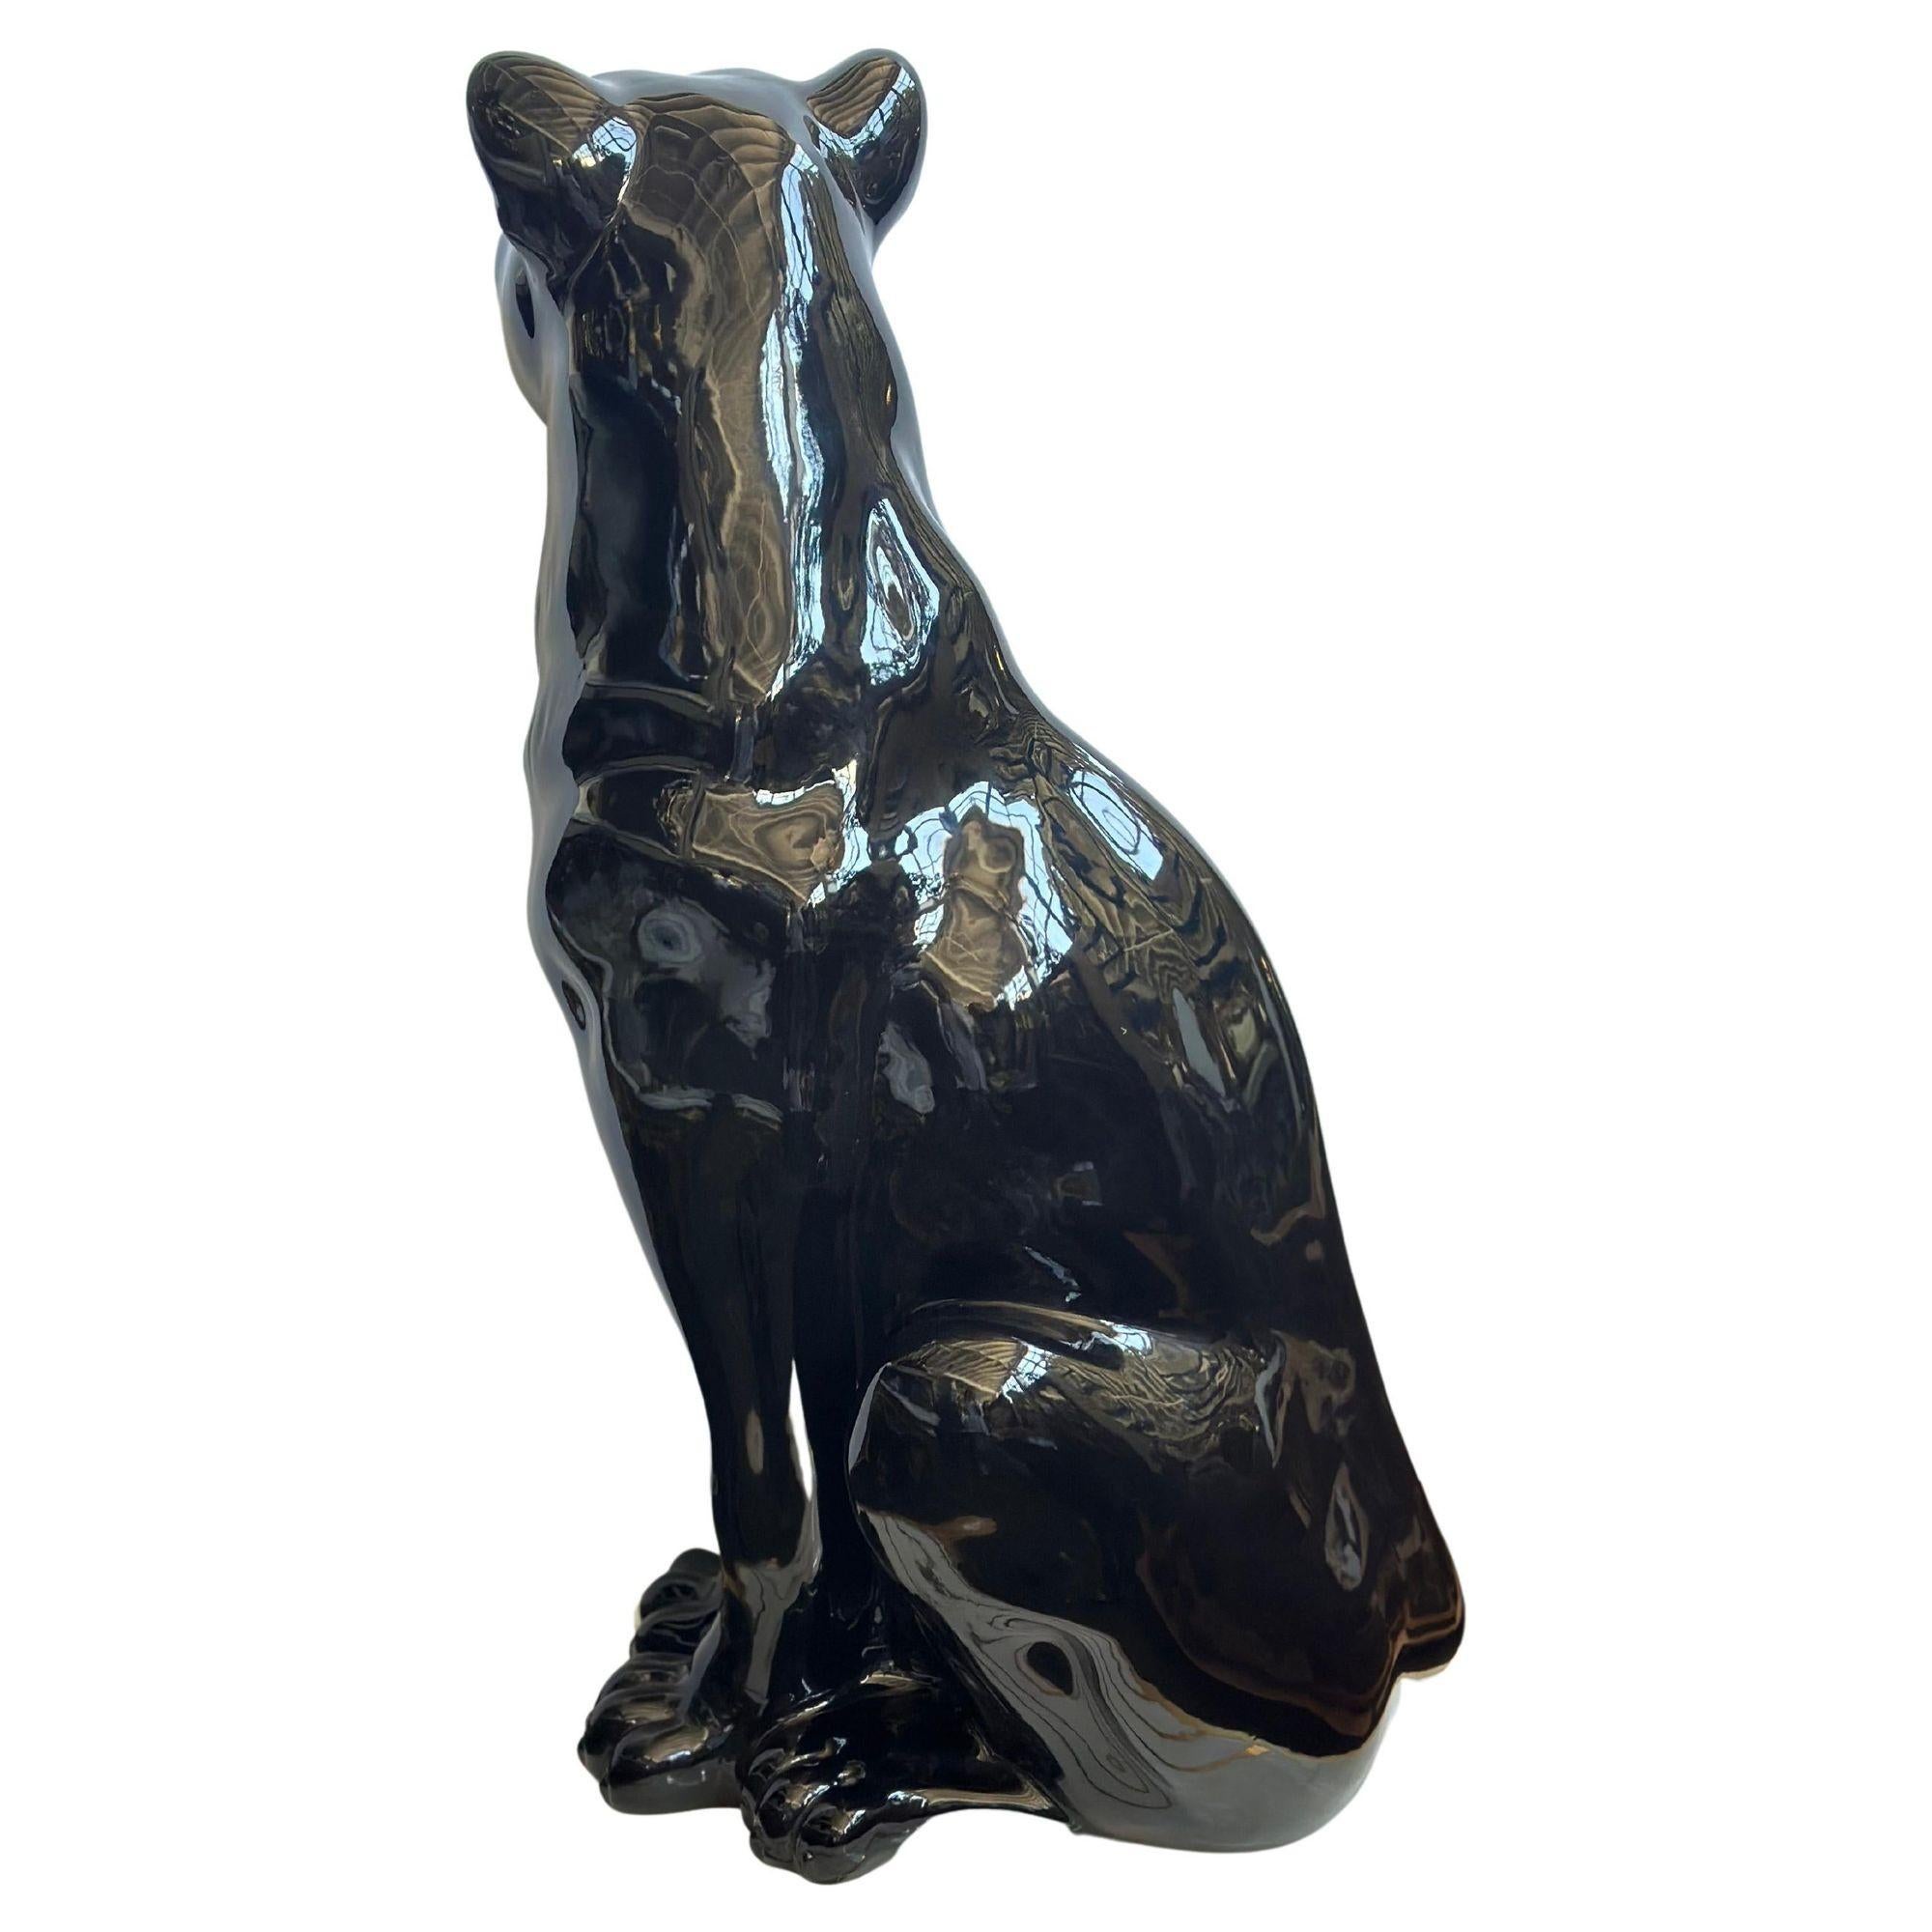 Vintage black panther sculpture adorned with Swarovski crystals on its eyes created in Italy during the 1980's.
The sculpture's glossy black ceramic finish showcases the panther's sleek form, emanating an air of strength and grace while the crystal